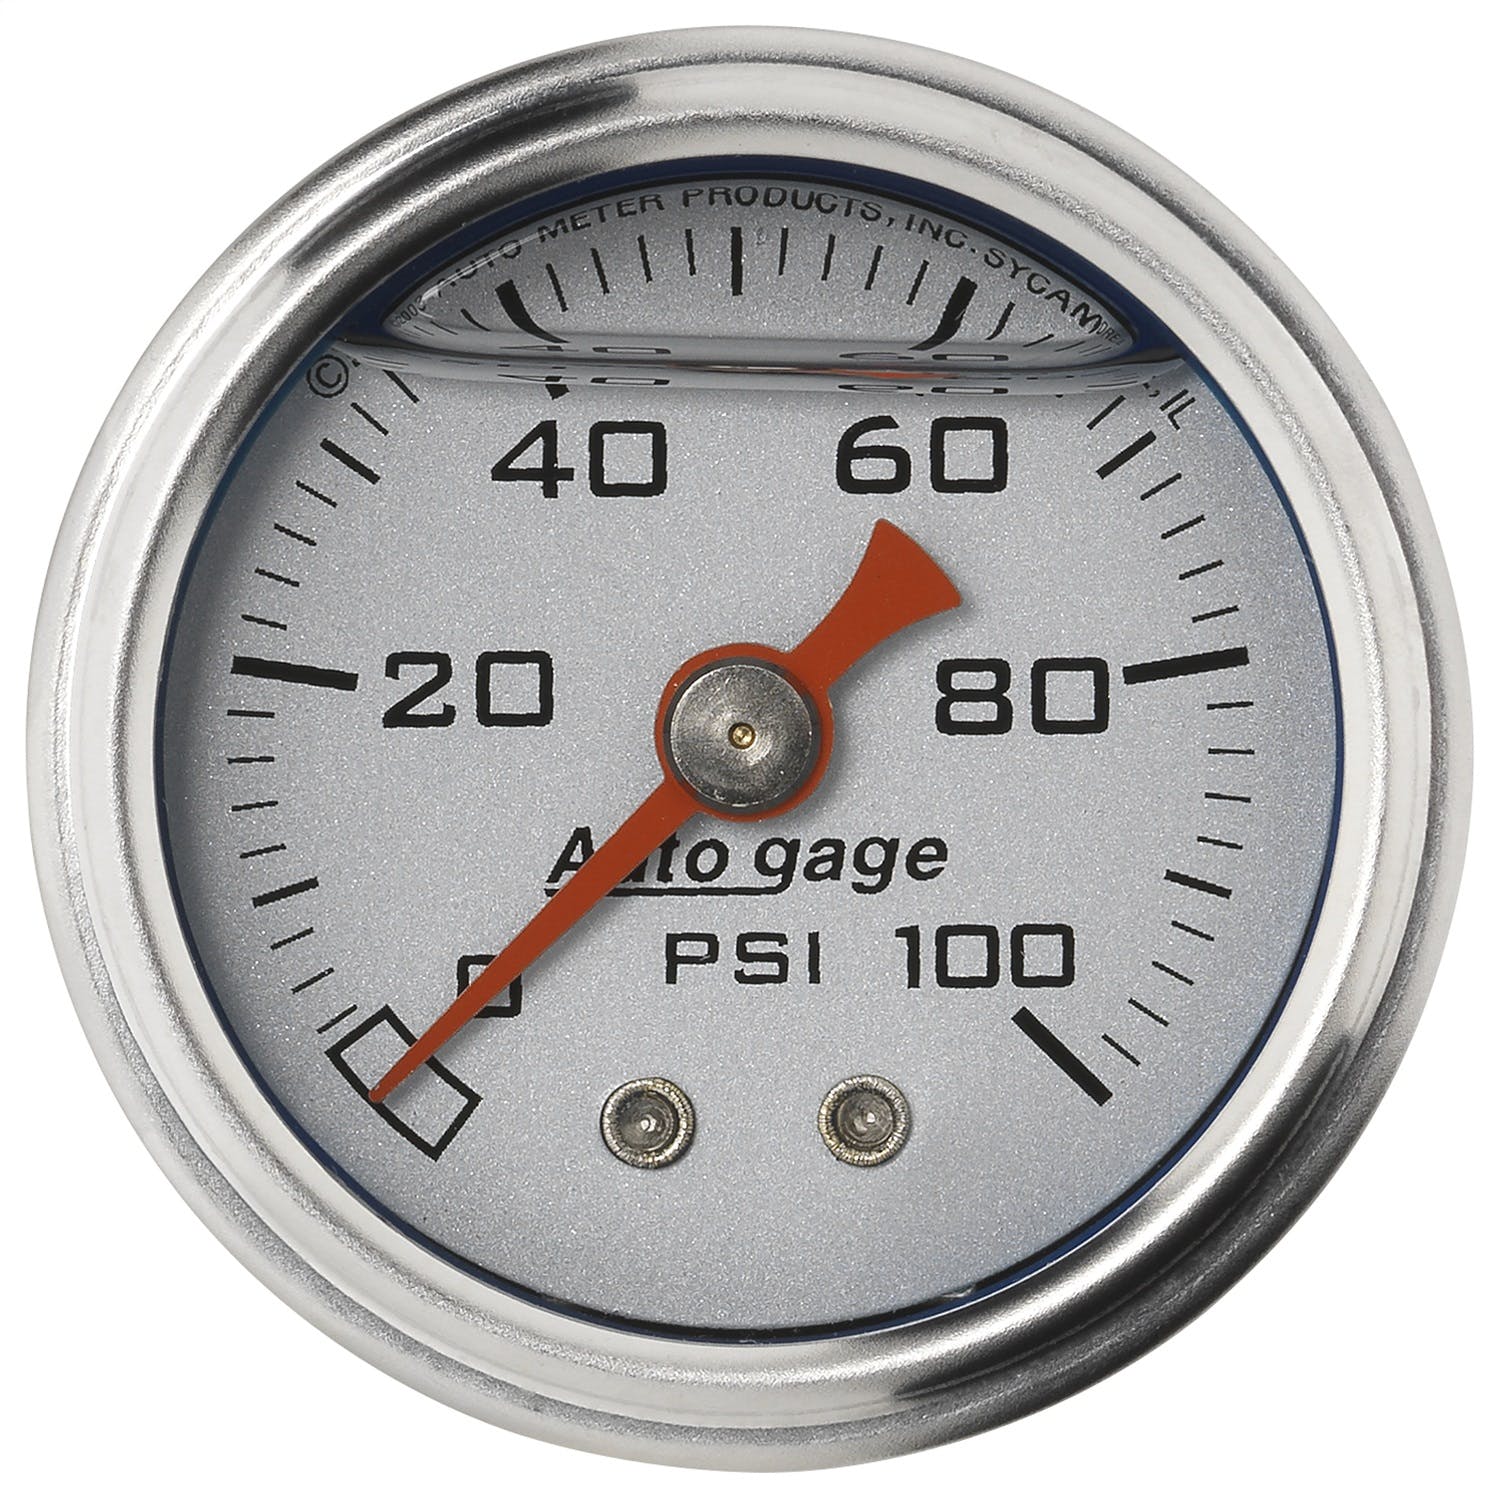 AutoMeter Products 2180 Auto Gage Series Dampened-Movement Pressure Gauge Silver 0-100 PSI 1-1/2 inch